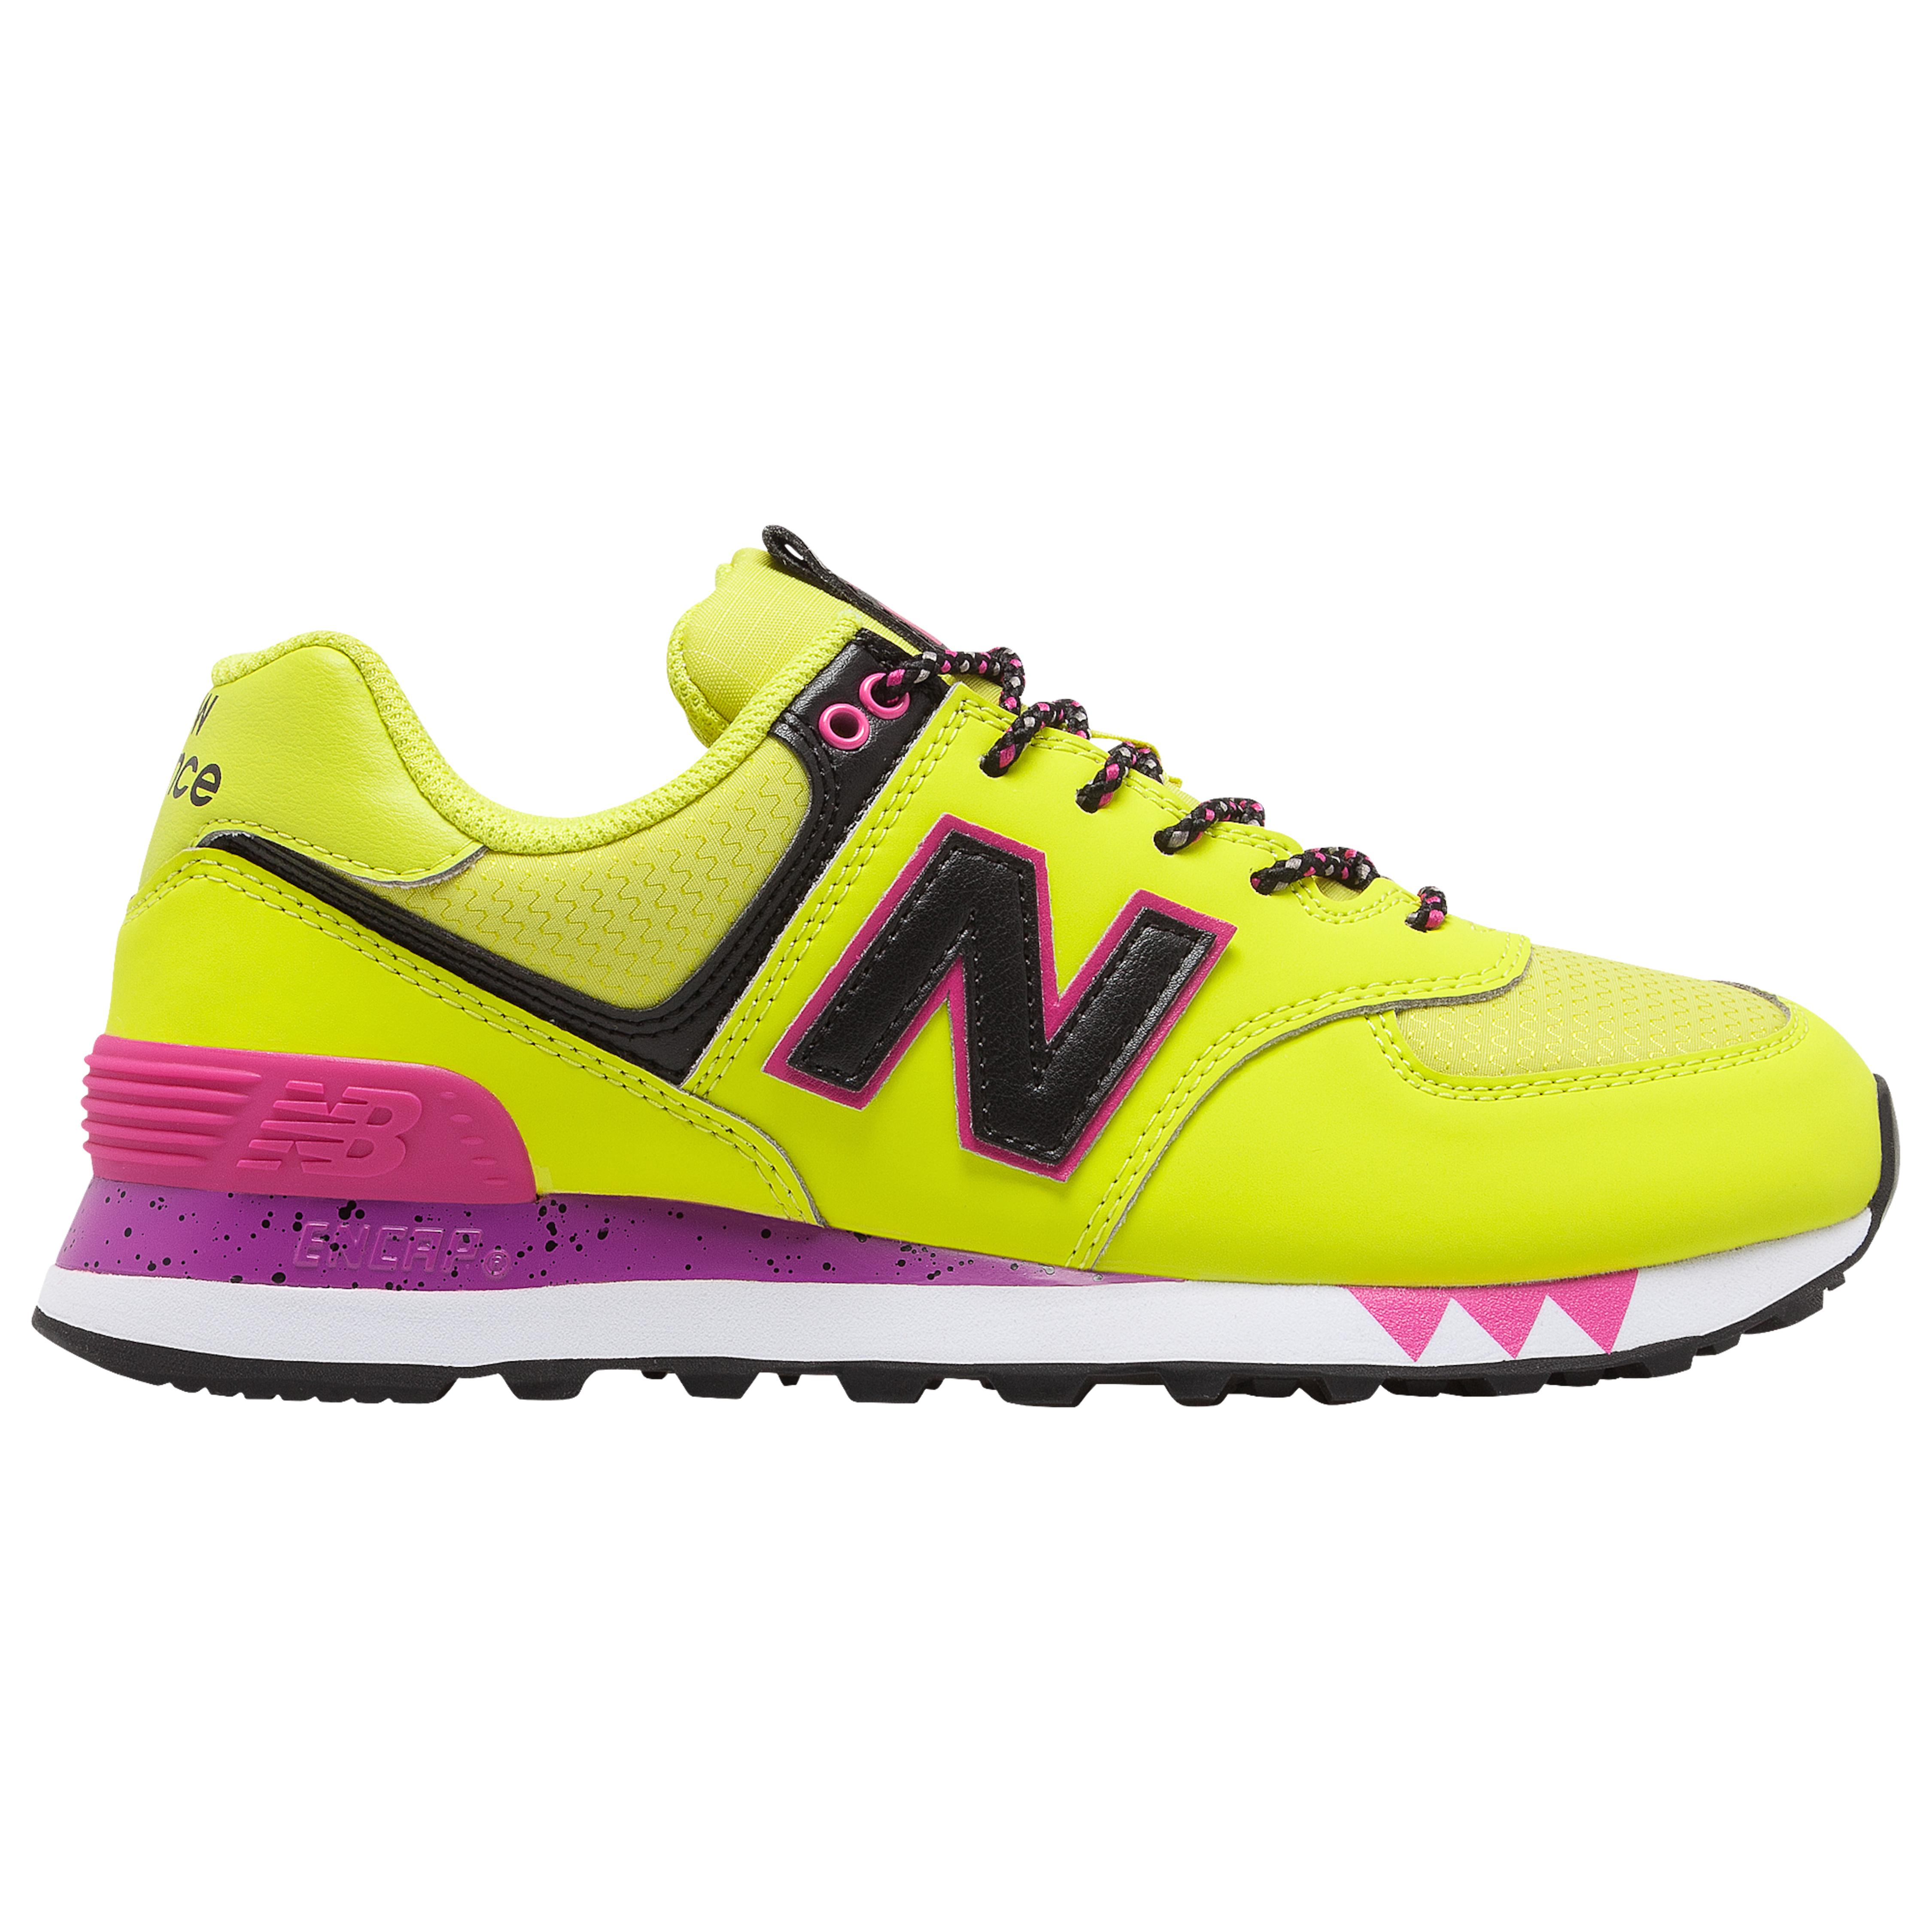 New Balance Suede 574 Classic in Yellow/Black (Yellow) - Lyst